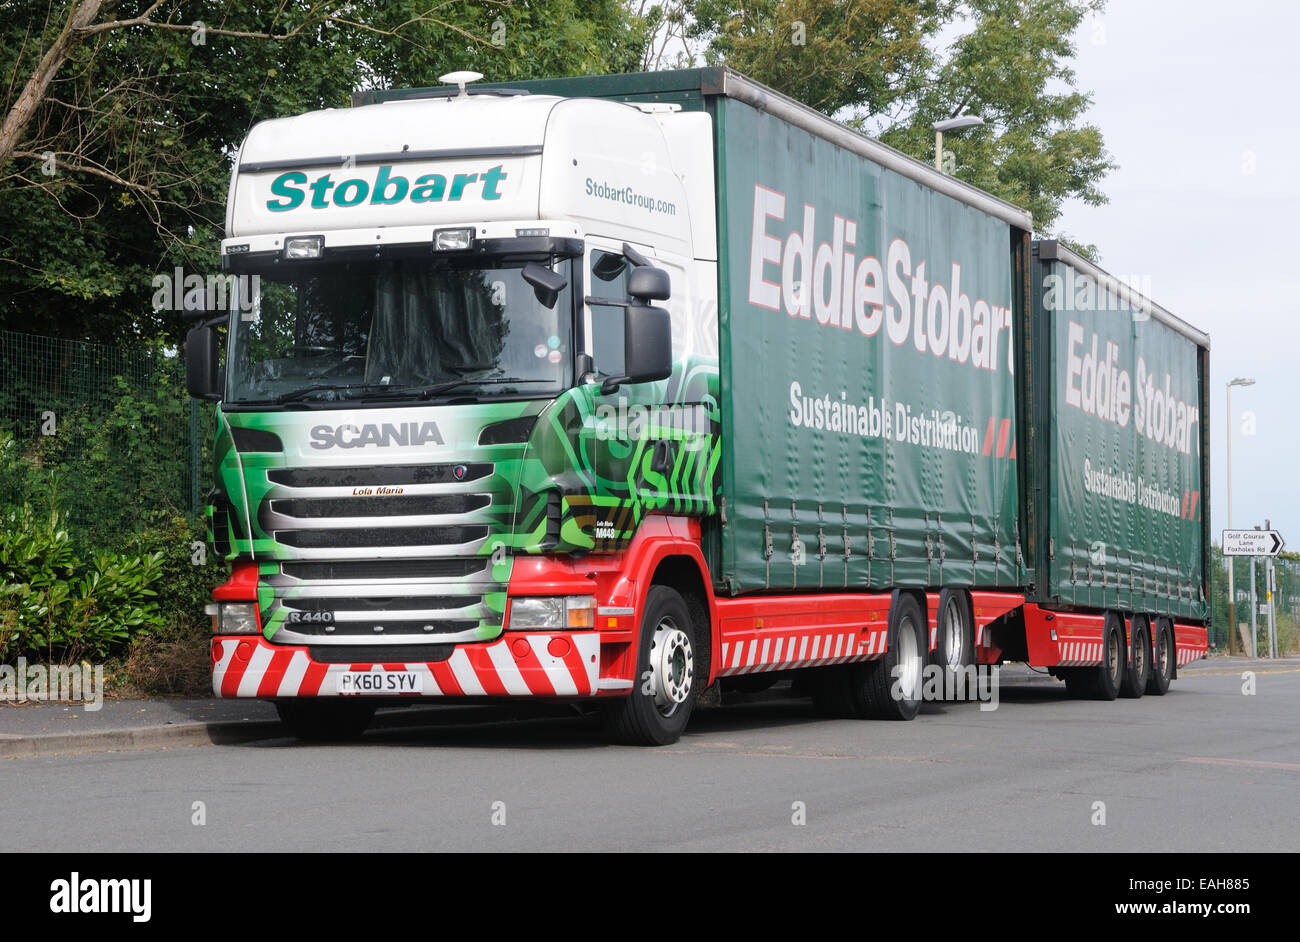 A Scania R440 lorry and trailer in Eddie Stobart livery in Leicester, Leicestershire, England Stock Photo